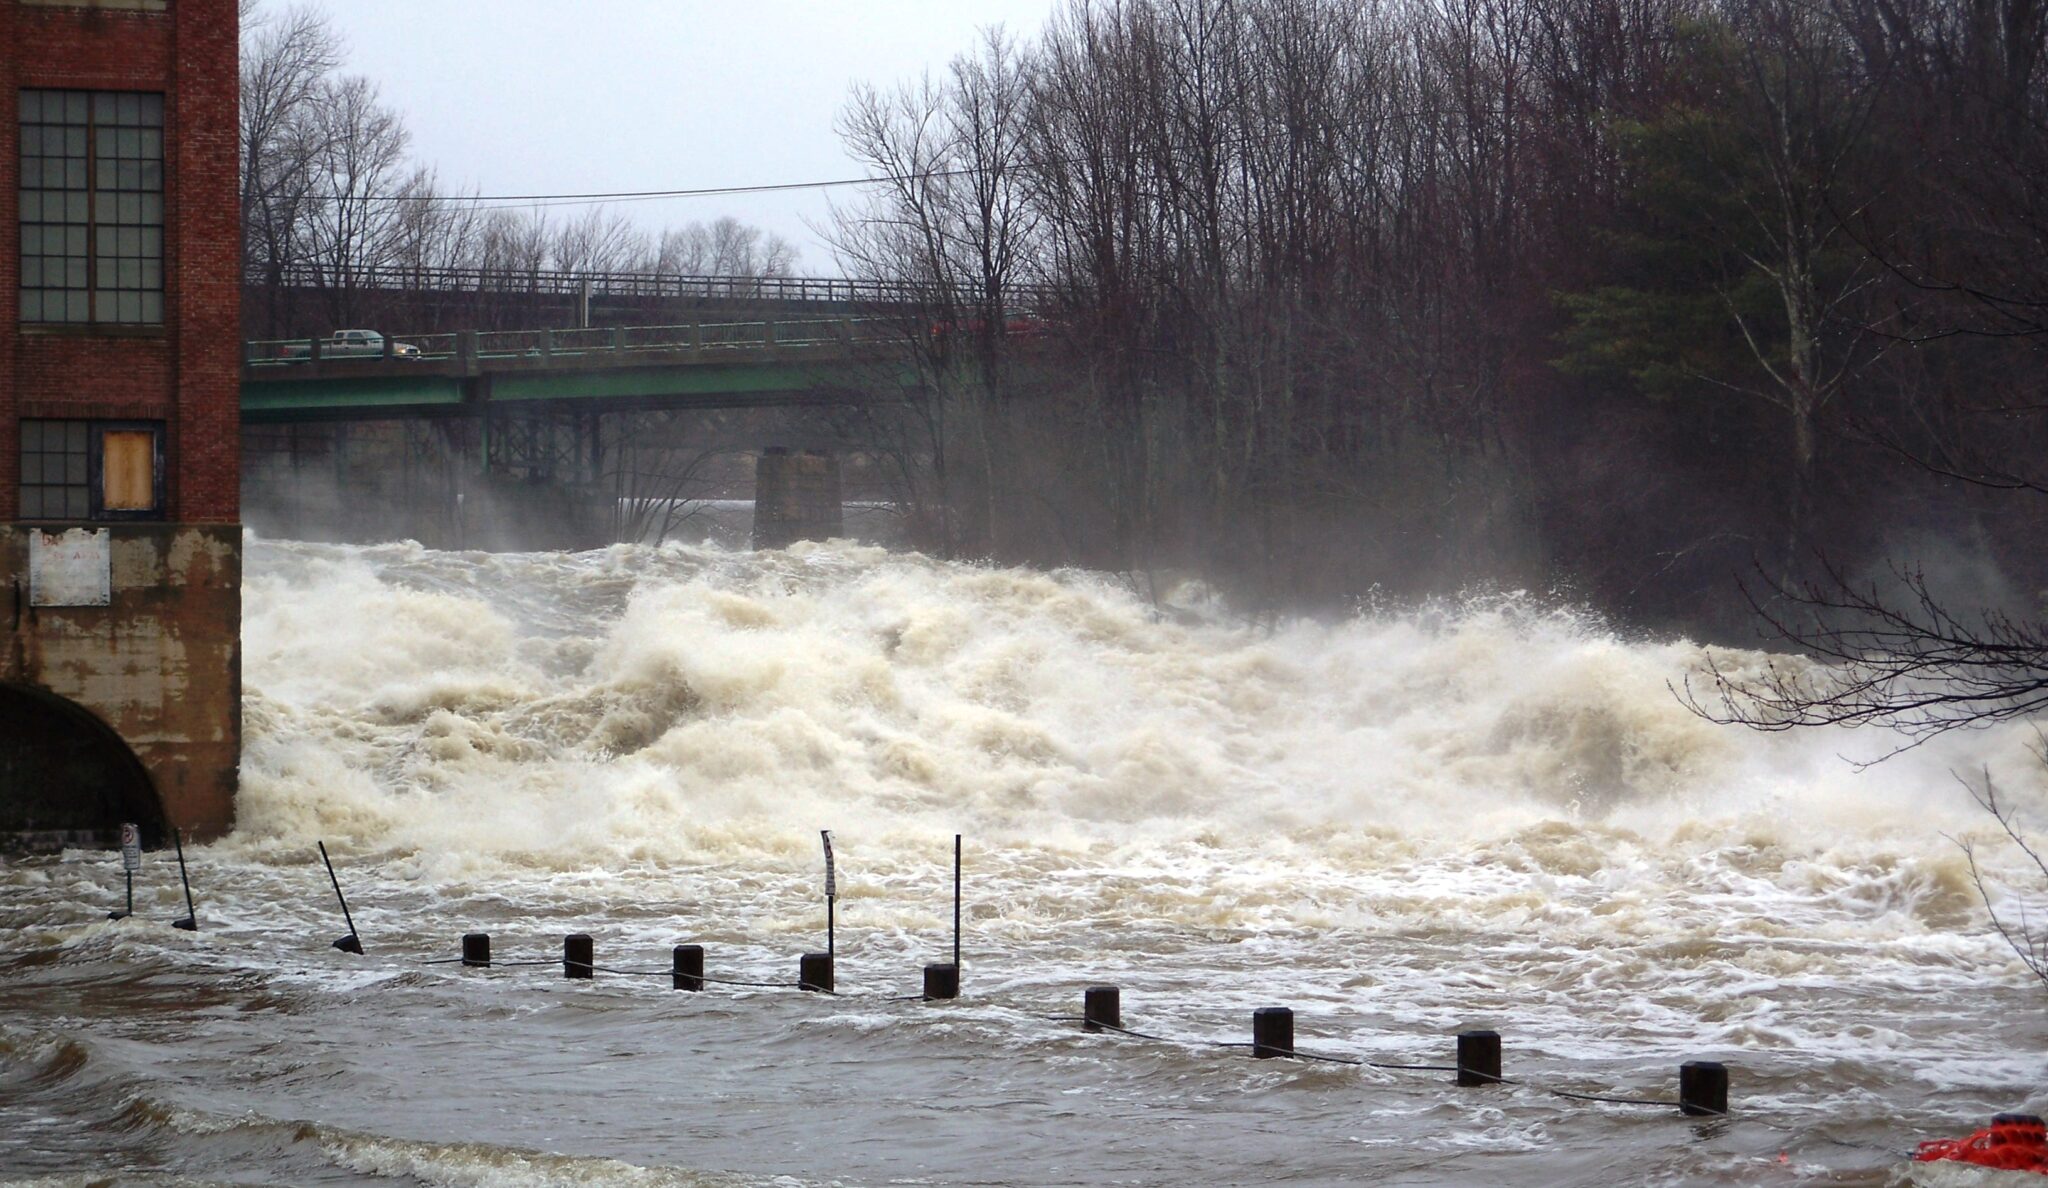 The Salmon Falls River overflows its banks in Rollinsford